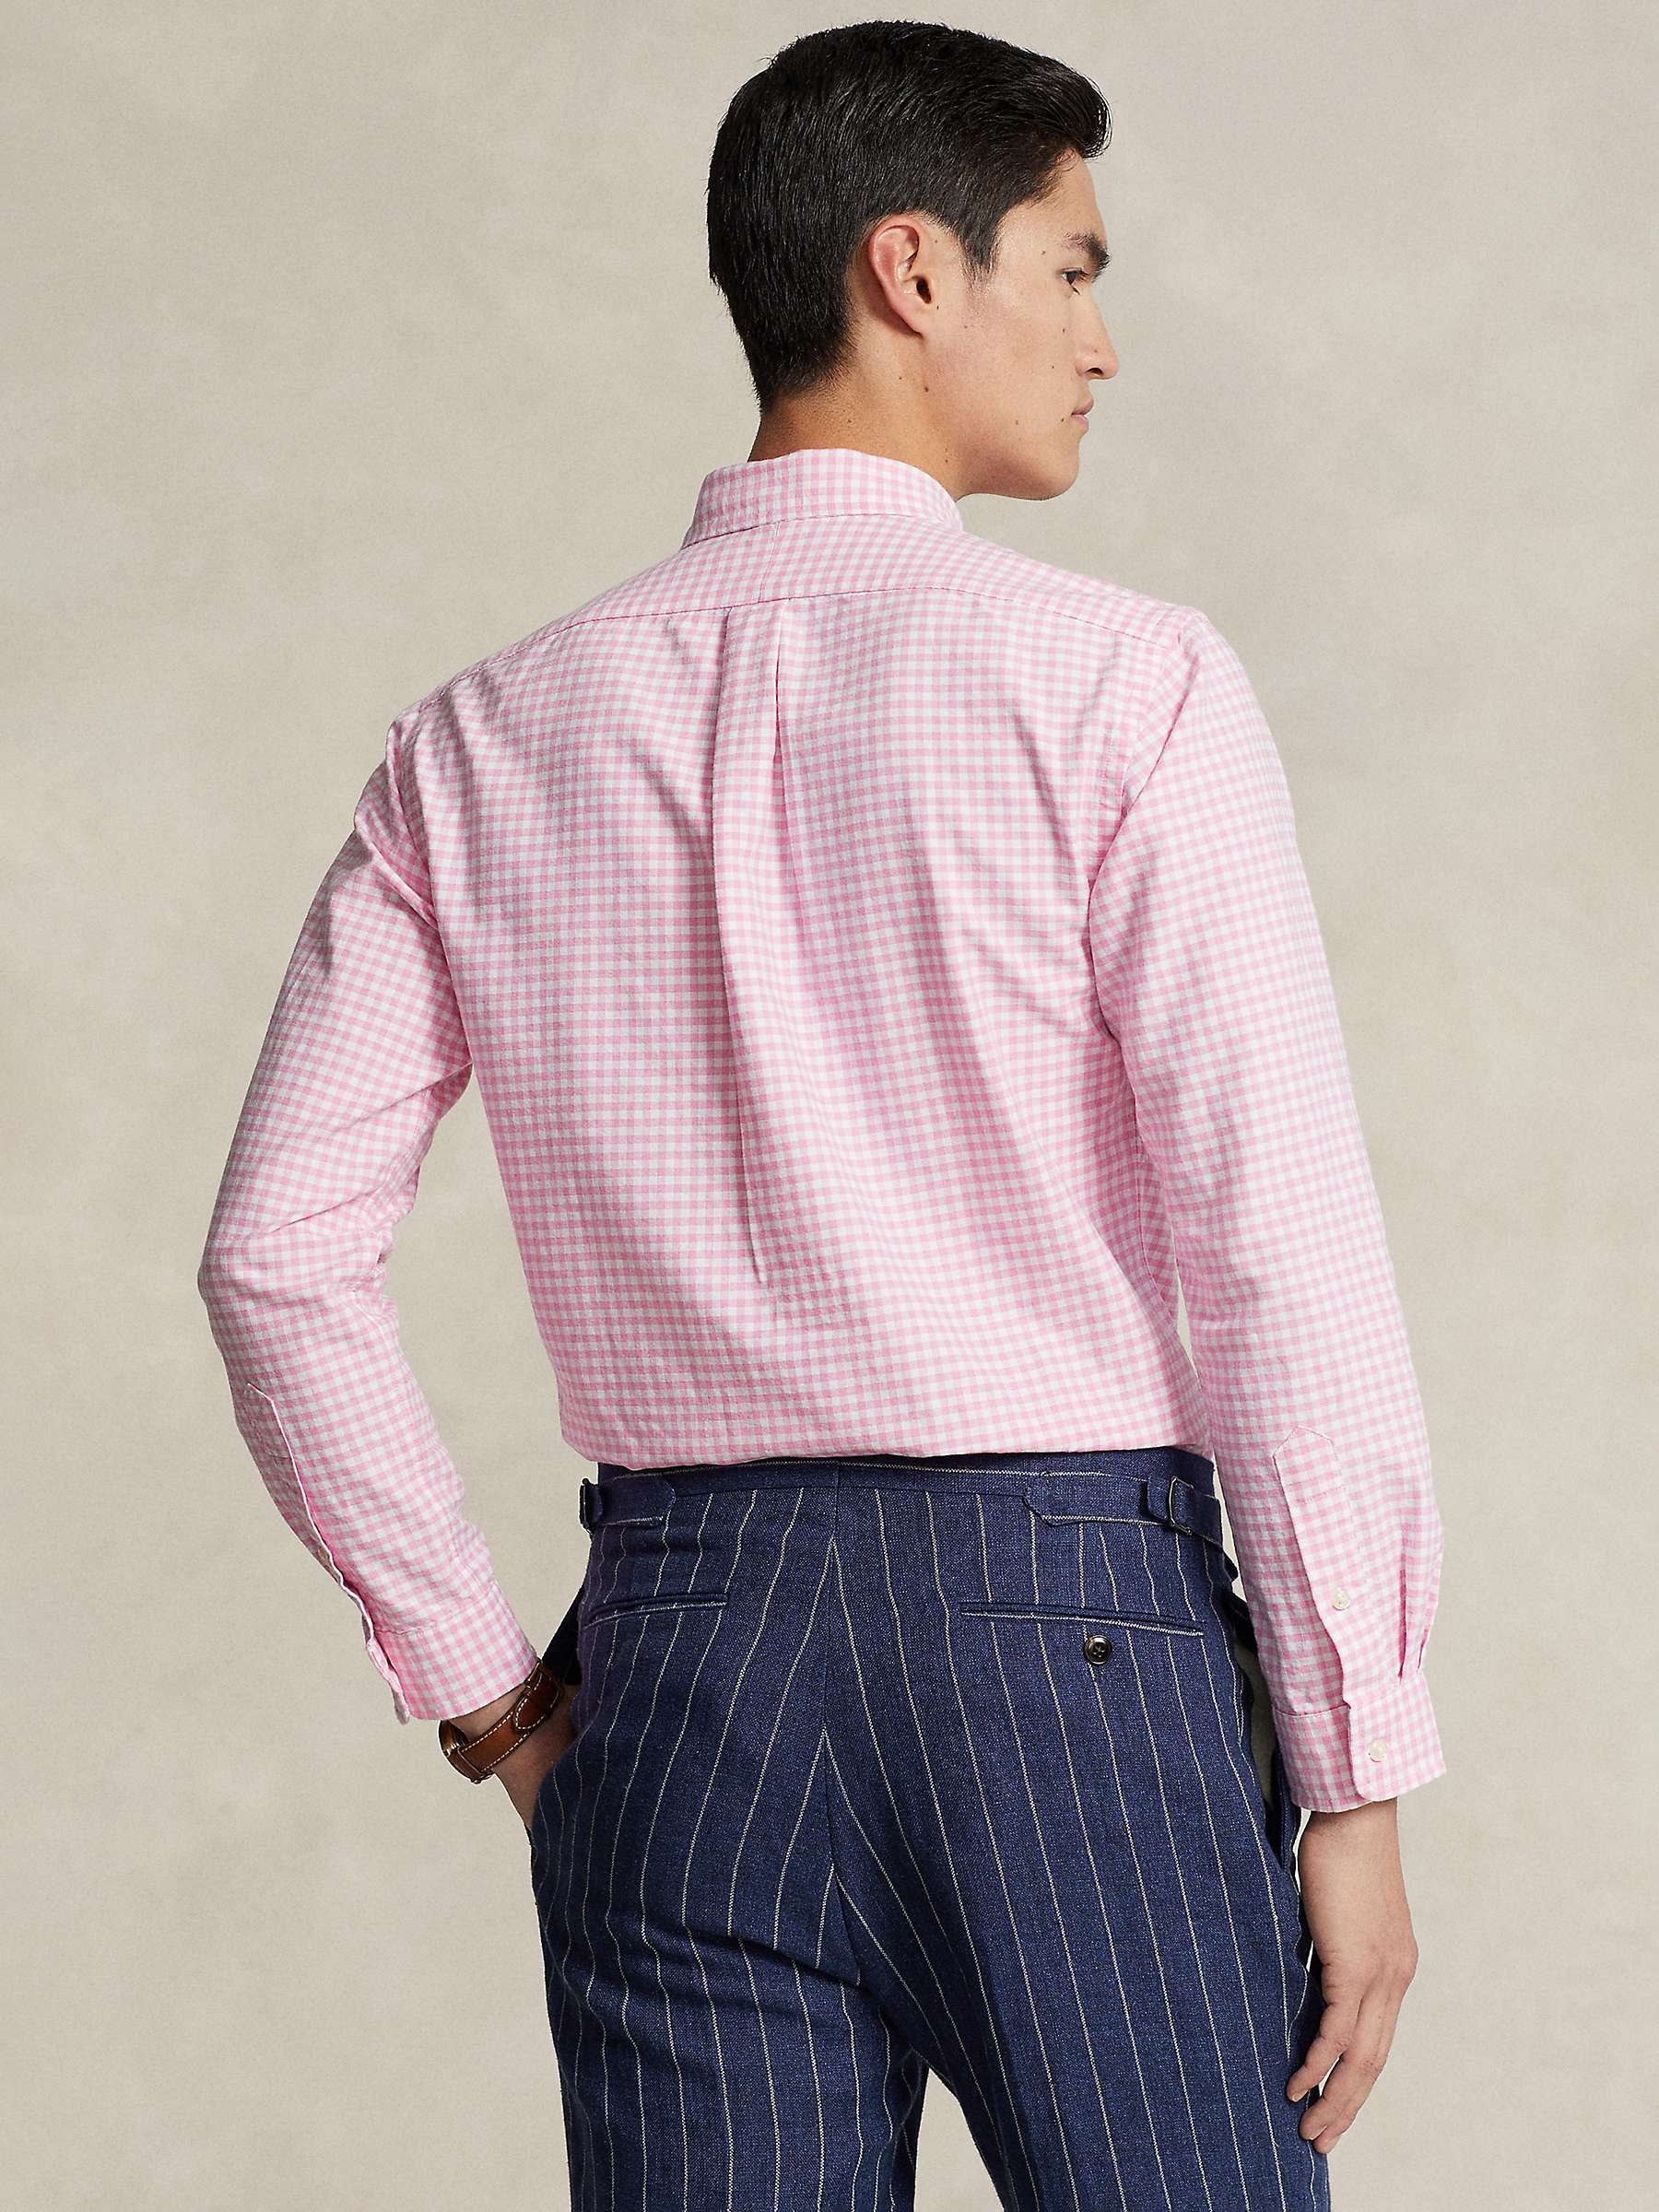 Buy Polo Ralph Lauren Tailored Fit Gingham Oxford Shirt, Pink/White Online at johnlewis.com